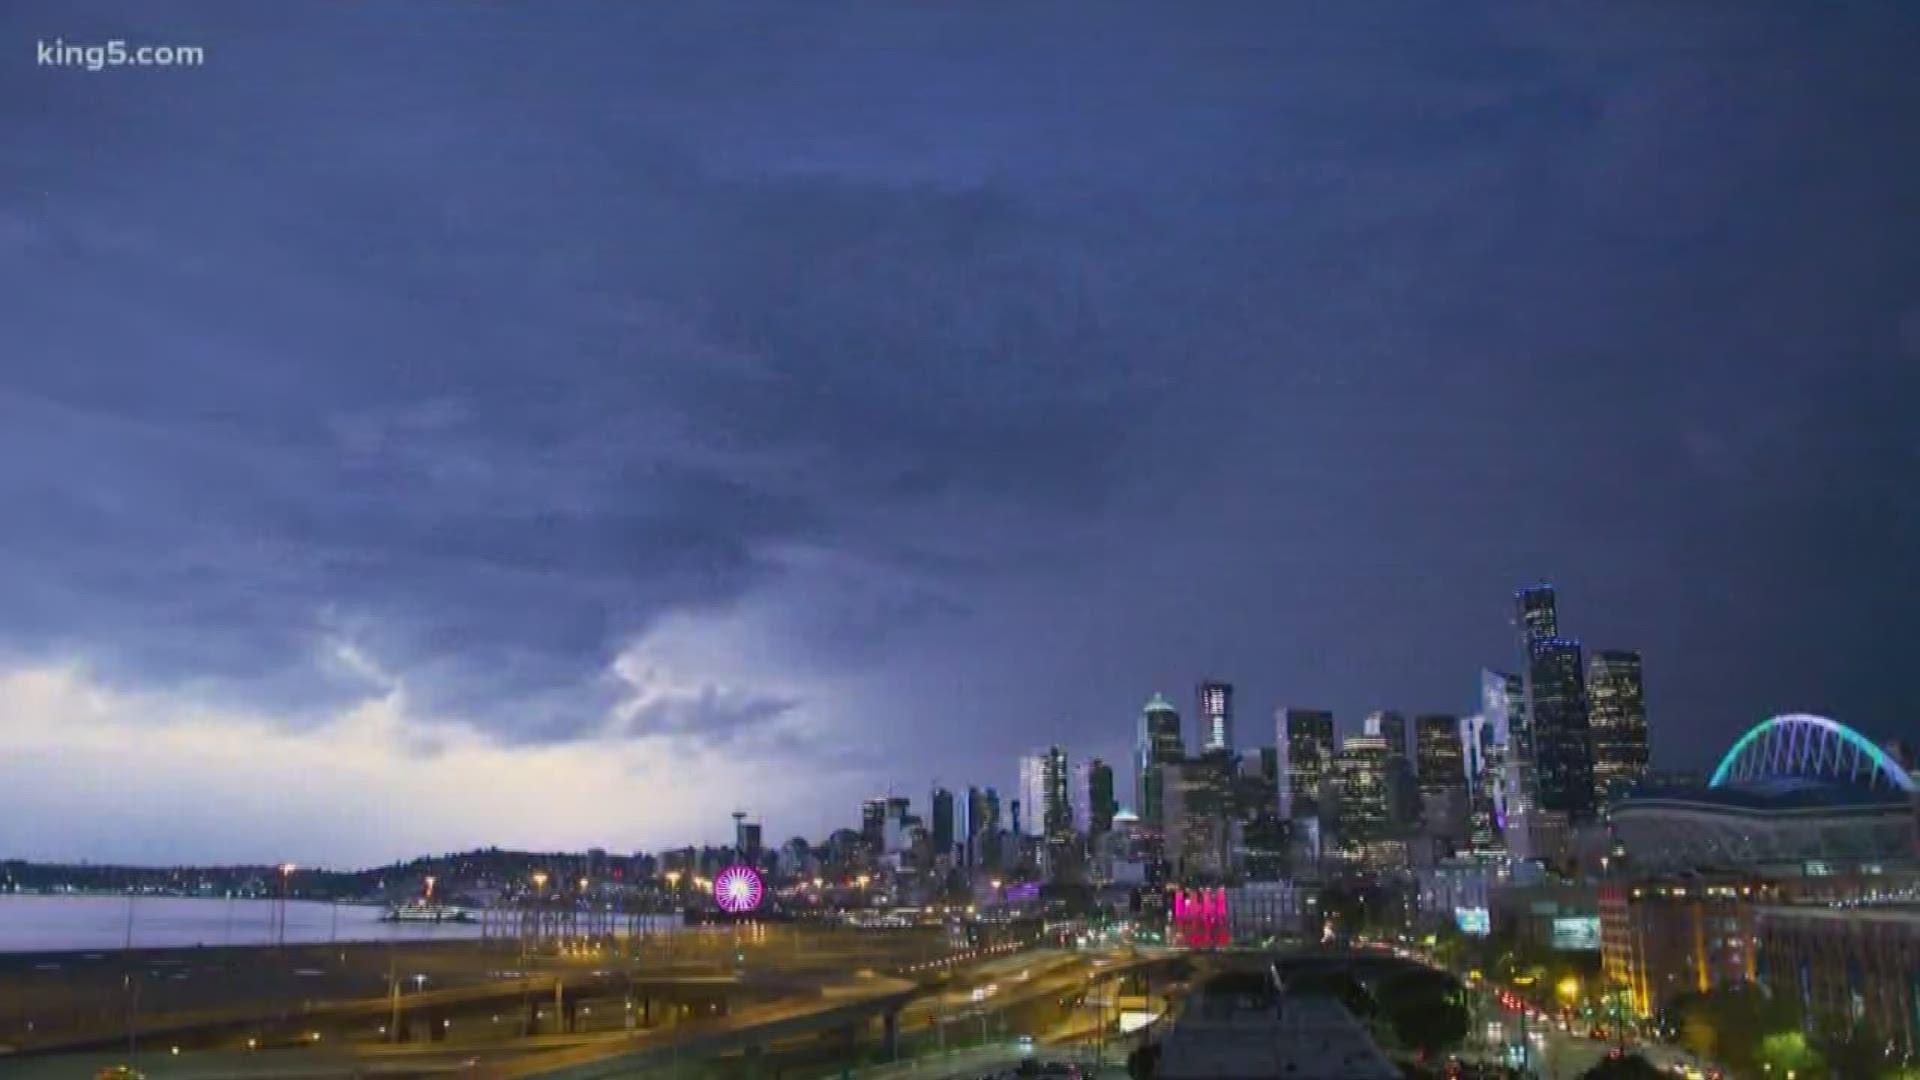 A cold front brought rain and lightning to western Washington Thursday night for the second time in a week.